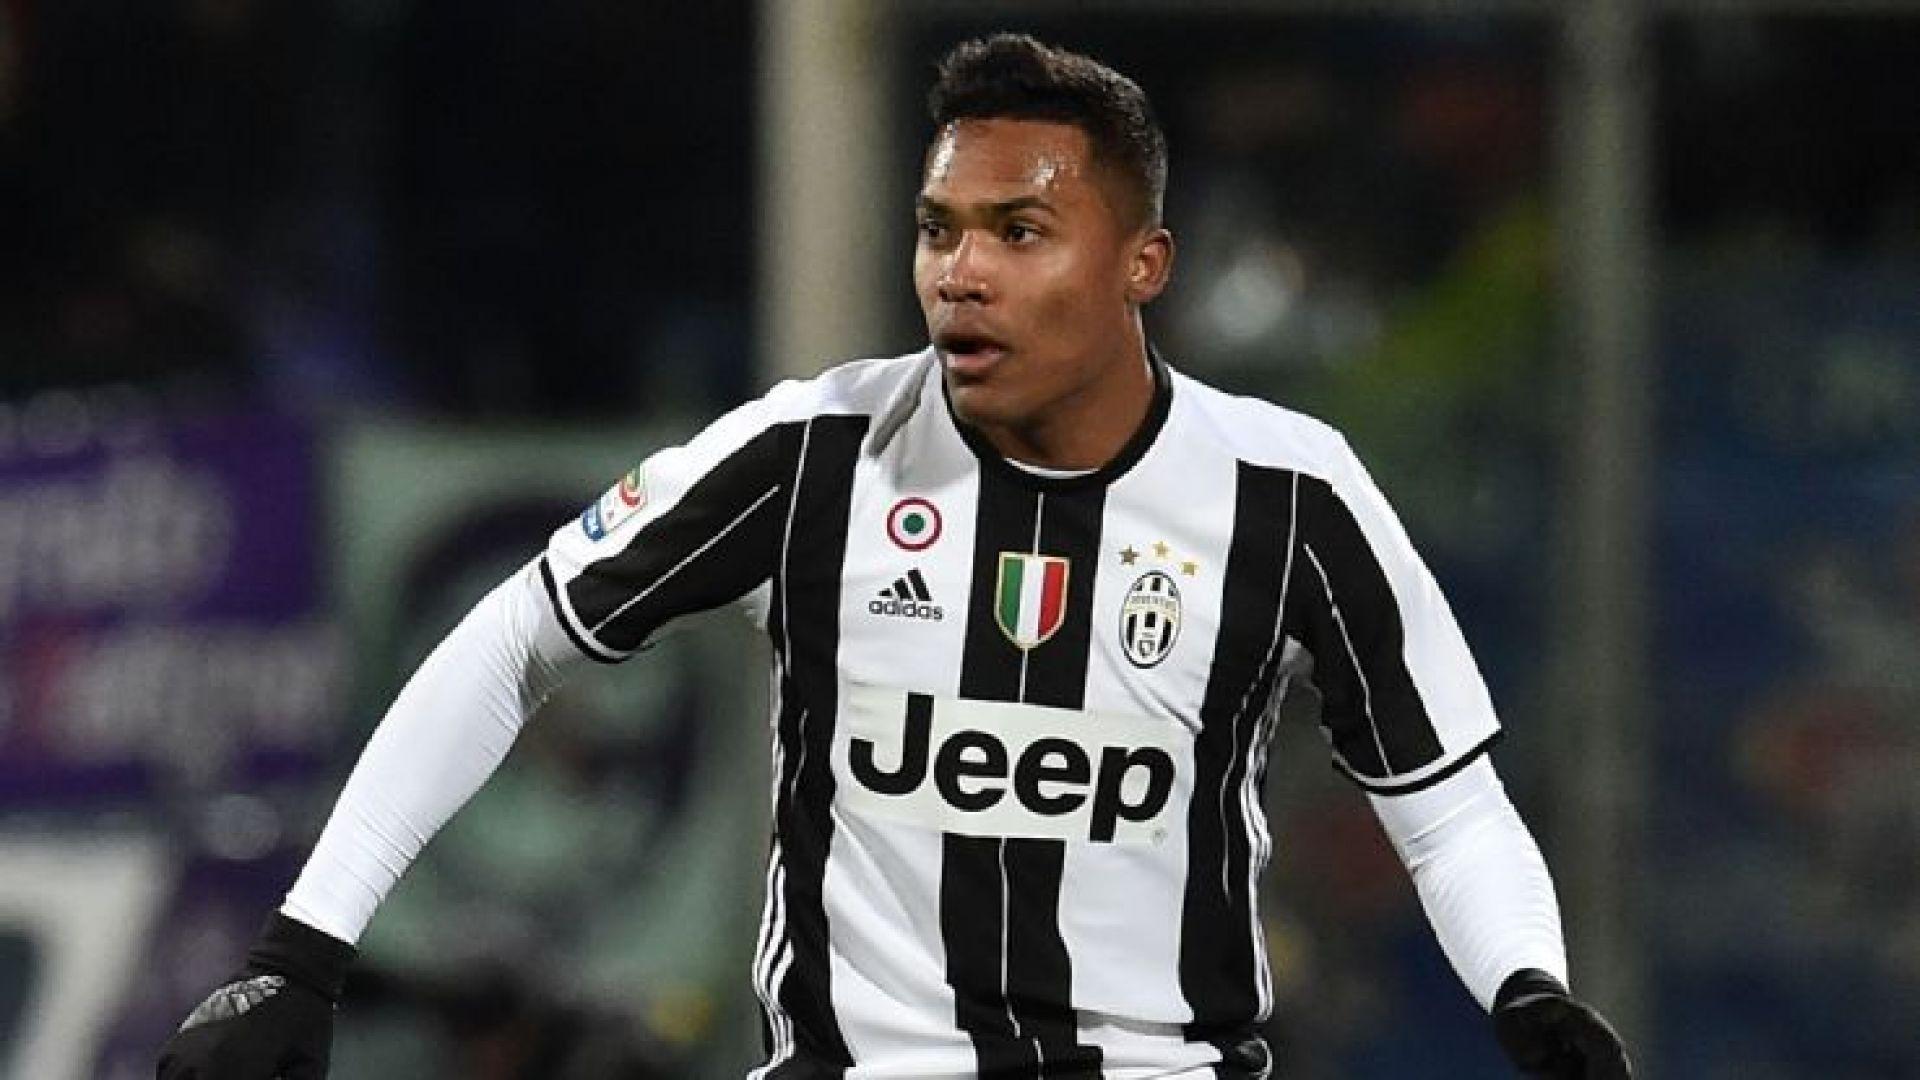 Chelsea to launch a £60m bid for Juve's Alex Sandro in January